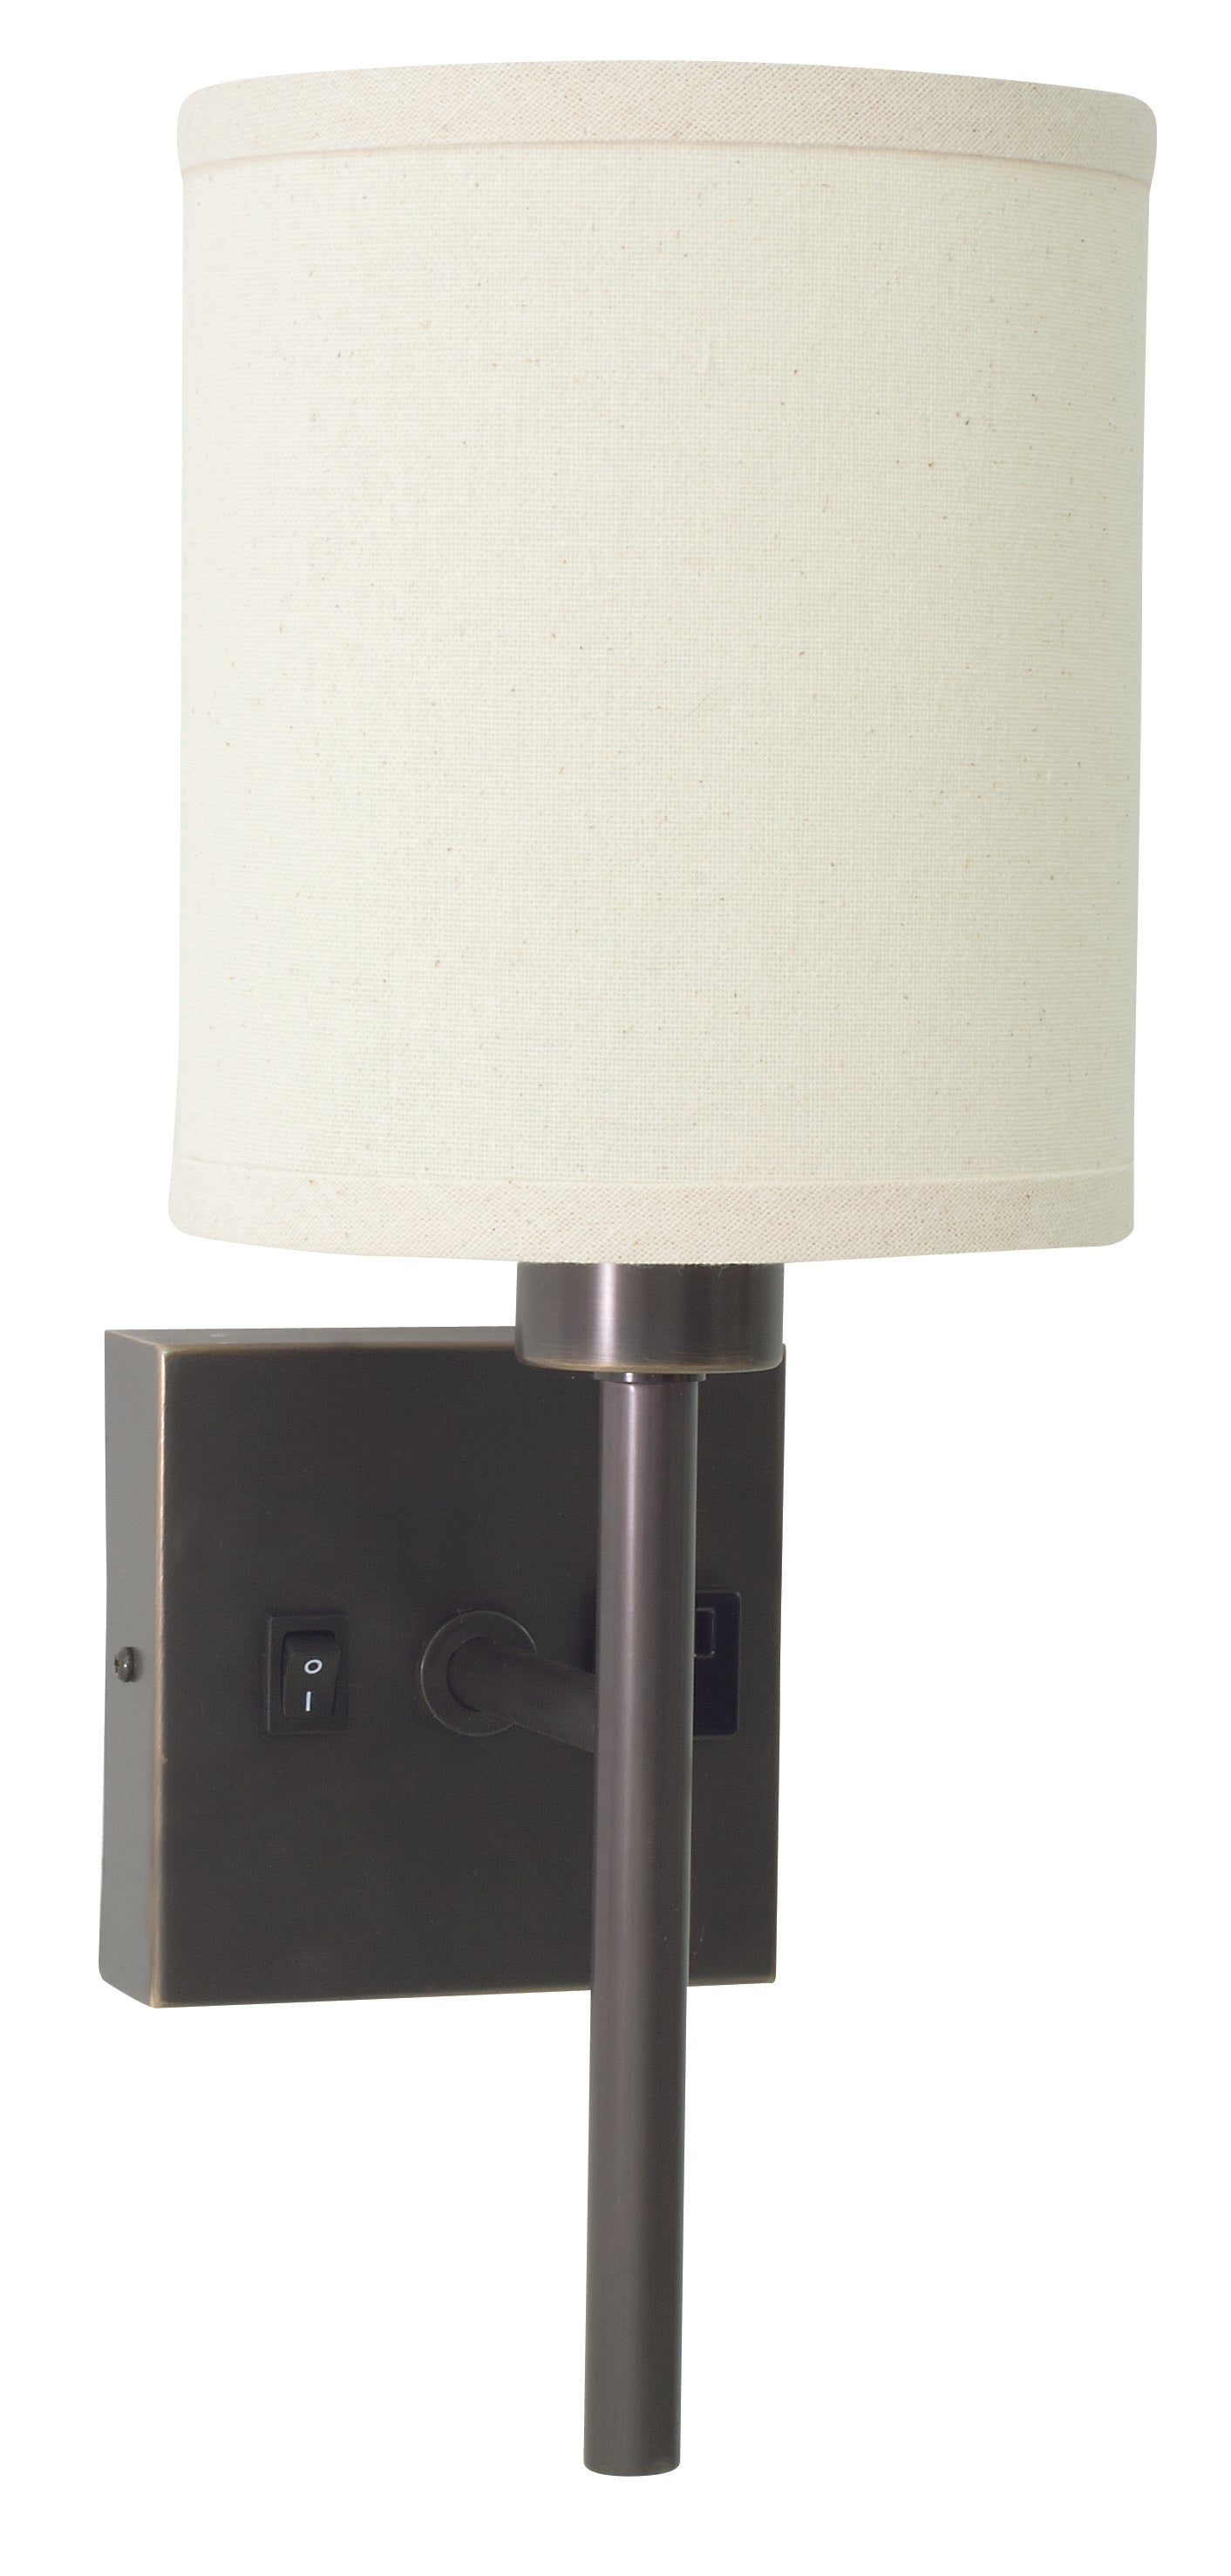 House of Troy Wall Lamp in Oil Rubbed Bronze with Convenience Outlet WL625-OB